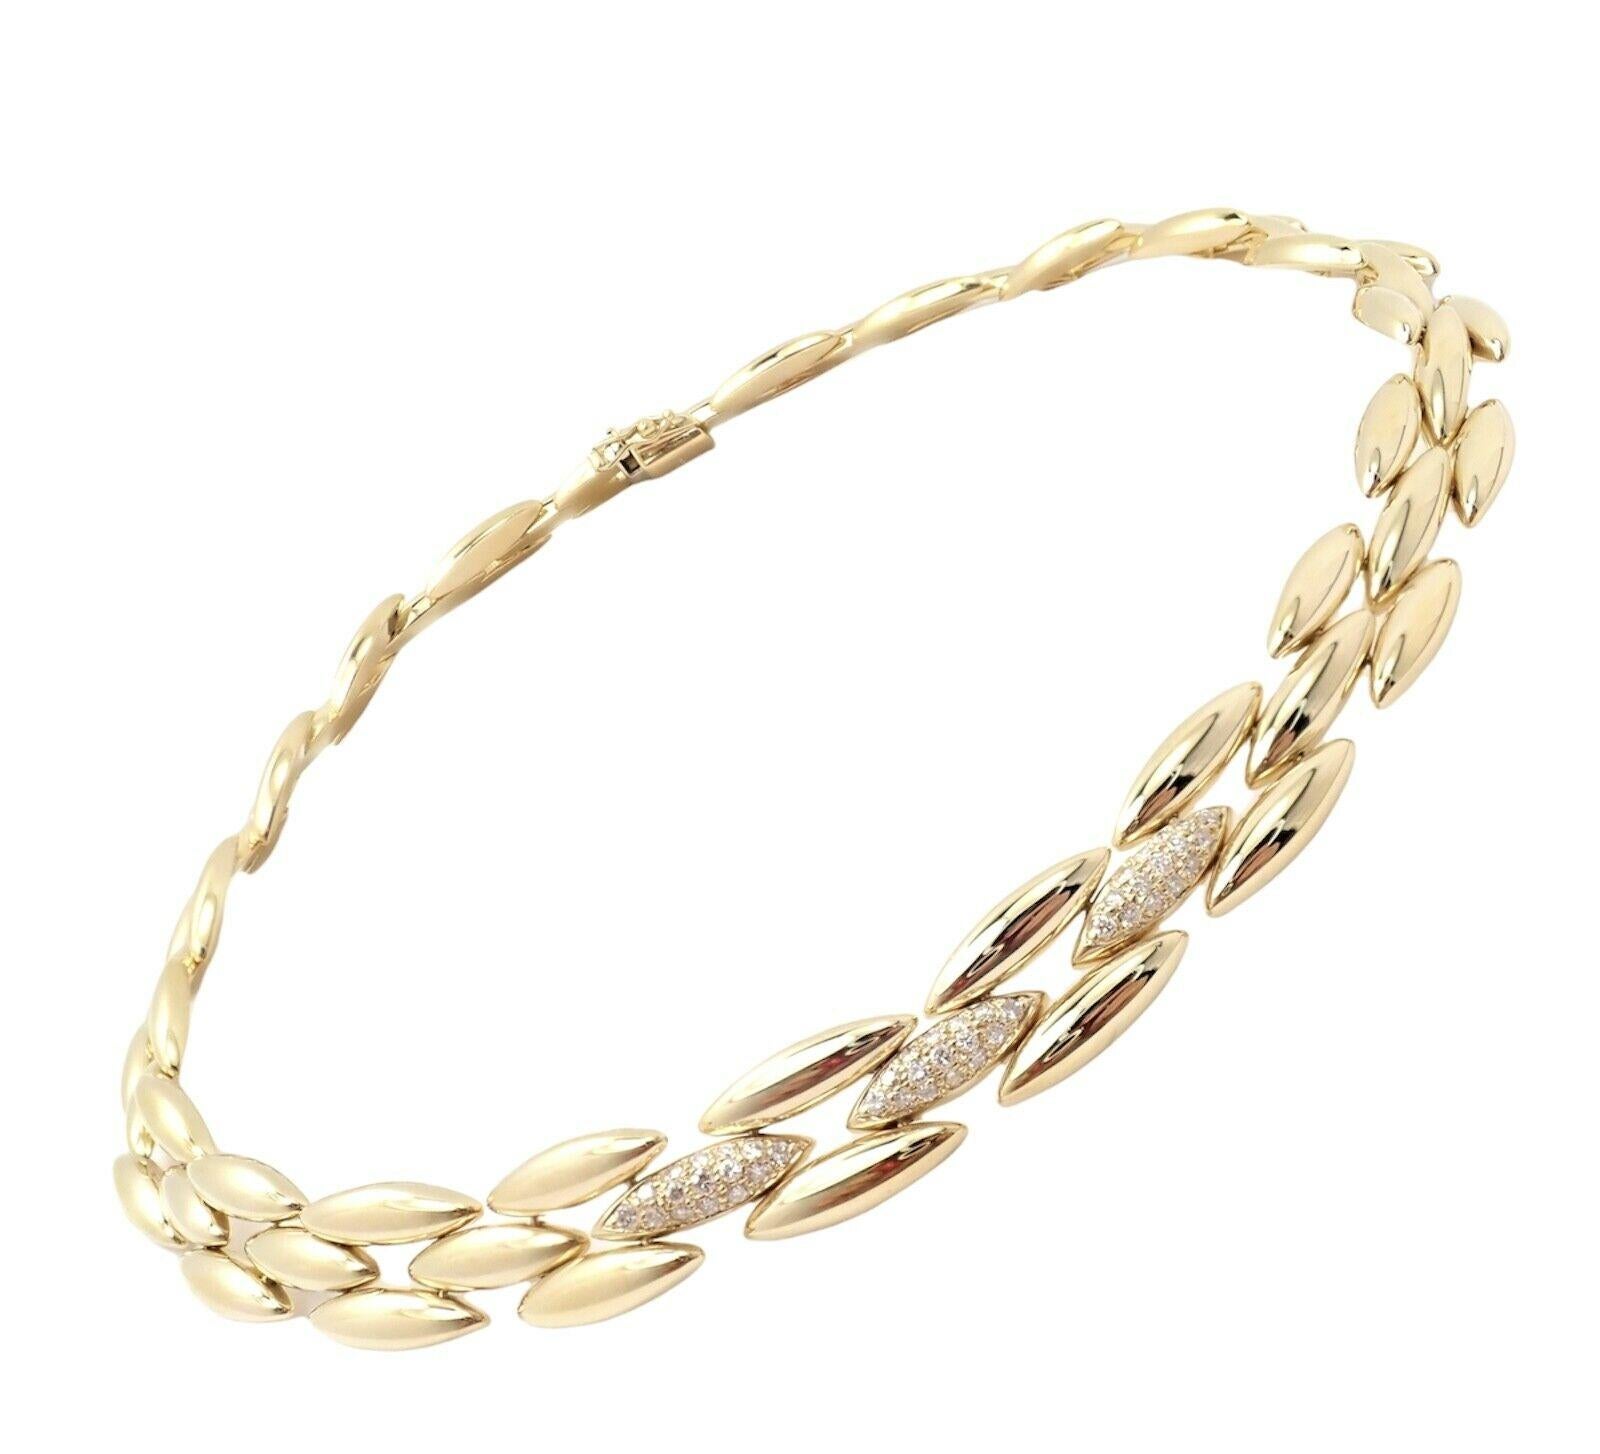 18k Yellow Gold Diamond Gentiane 3 Row Rice Link Necklace by Cartier. 
With 54 Round brilliant cut diamonds VVS1 clarity F color Total Diamond Weight approx. 1ct
This beautiful necklace comes with an original Cartier box.
Details: 
Total Length: